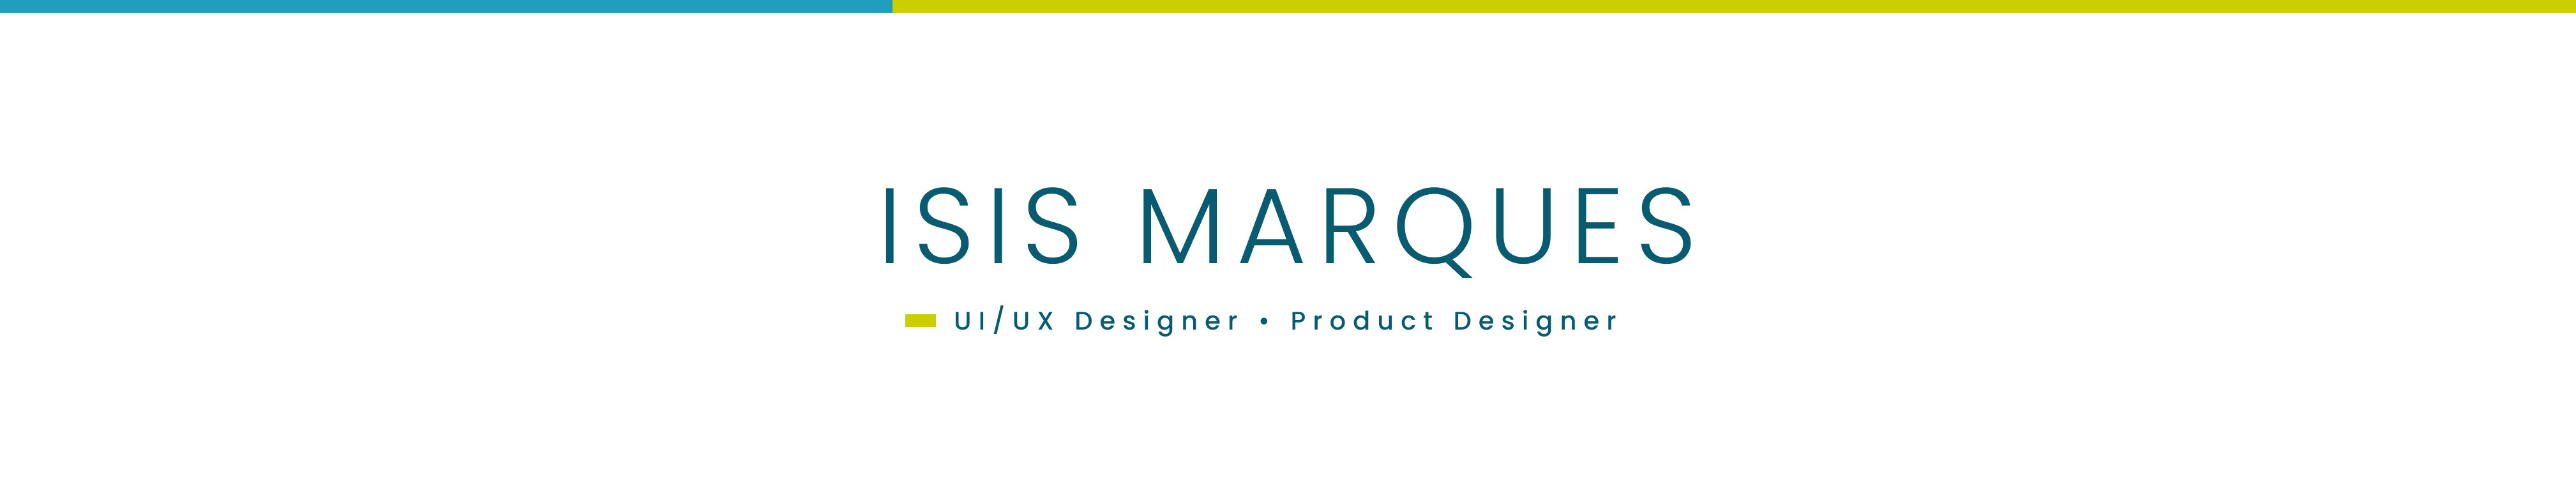 Isis Marques's profile banner